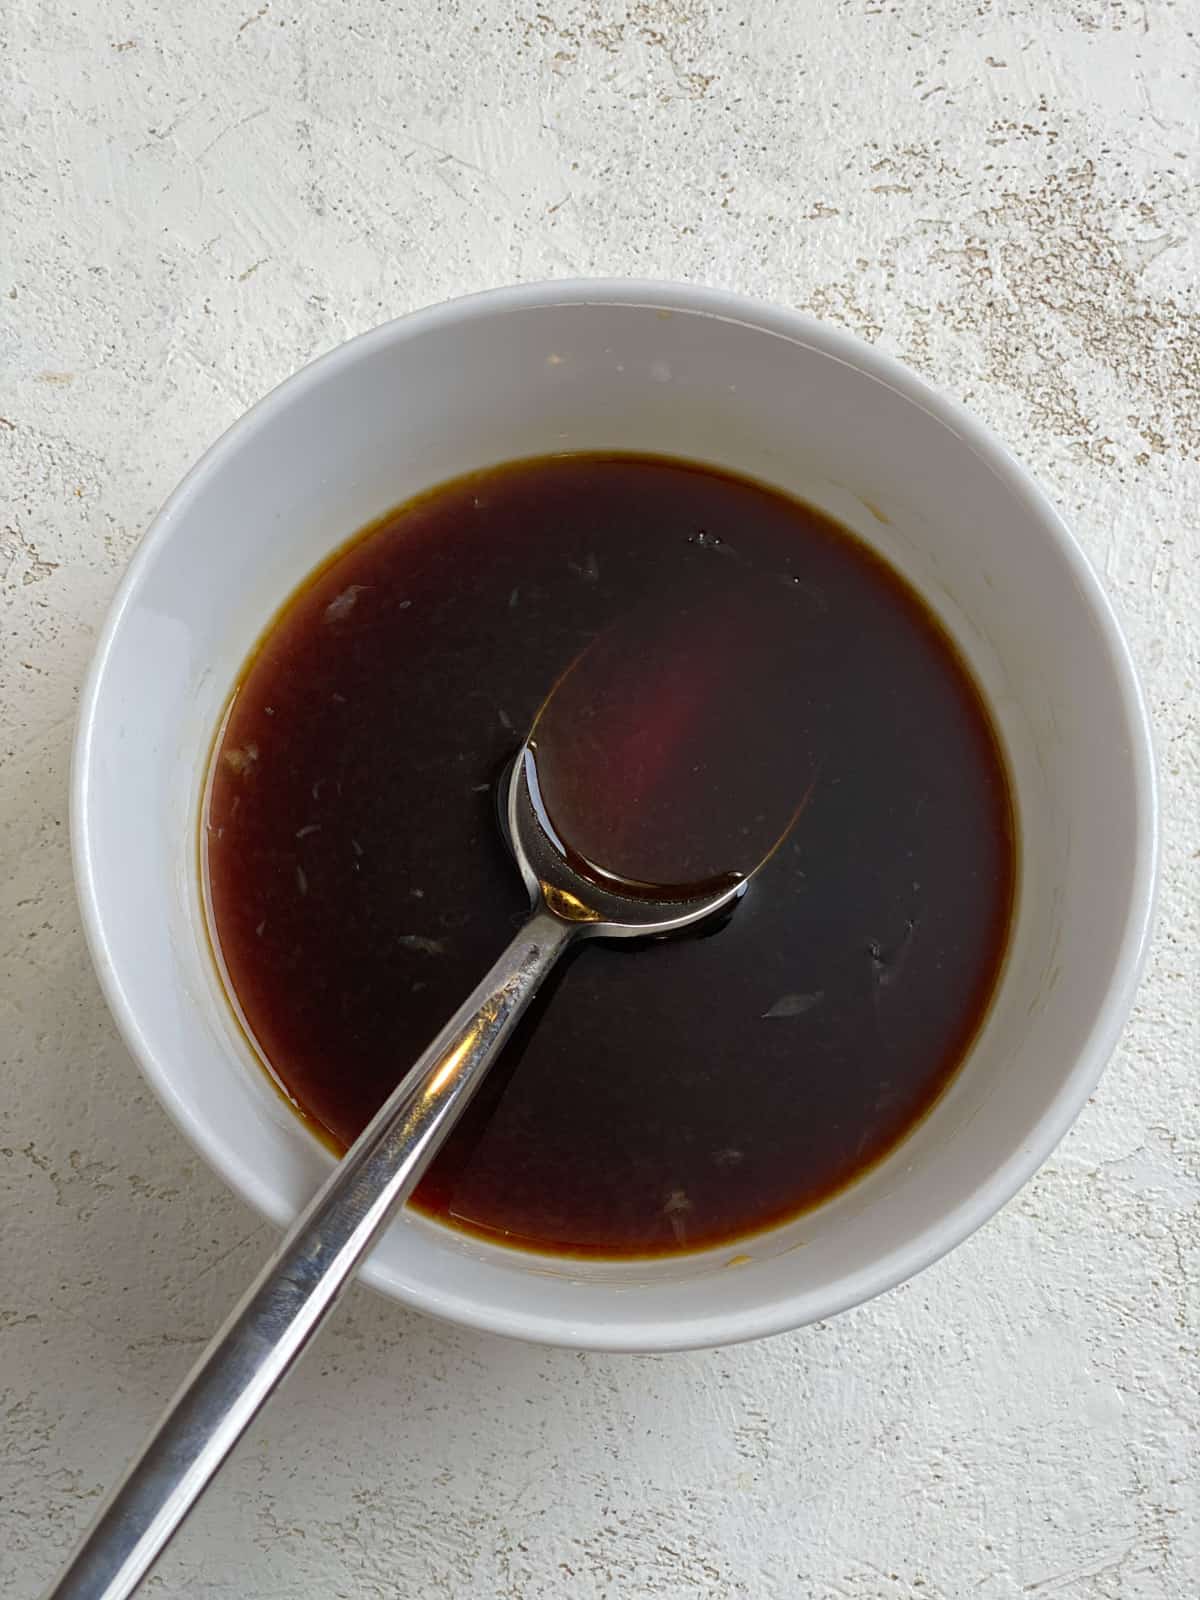 process of mixing soy sauce mixture in small white bowl